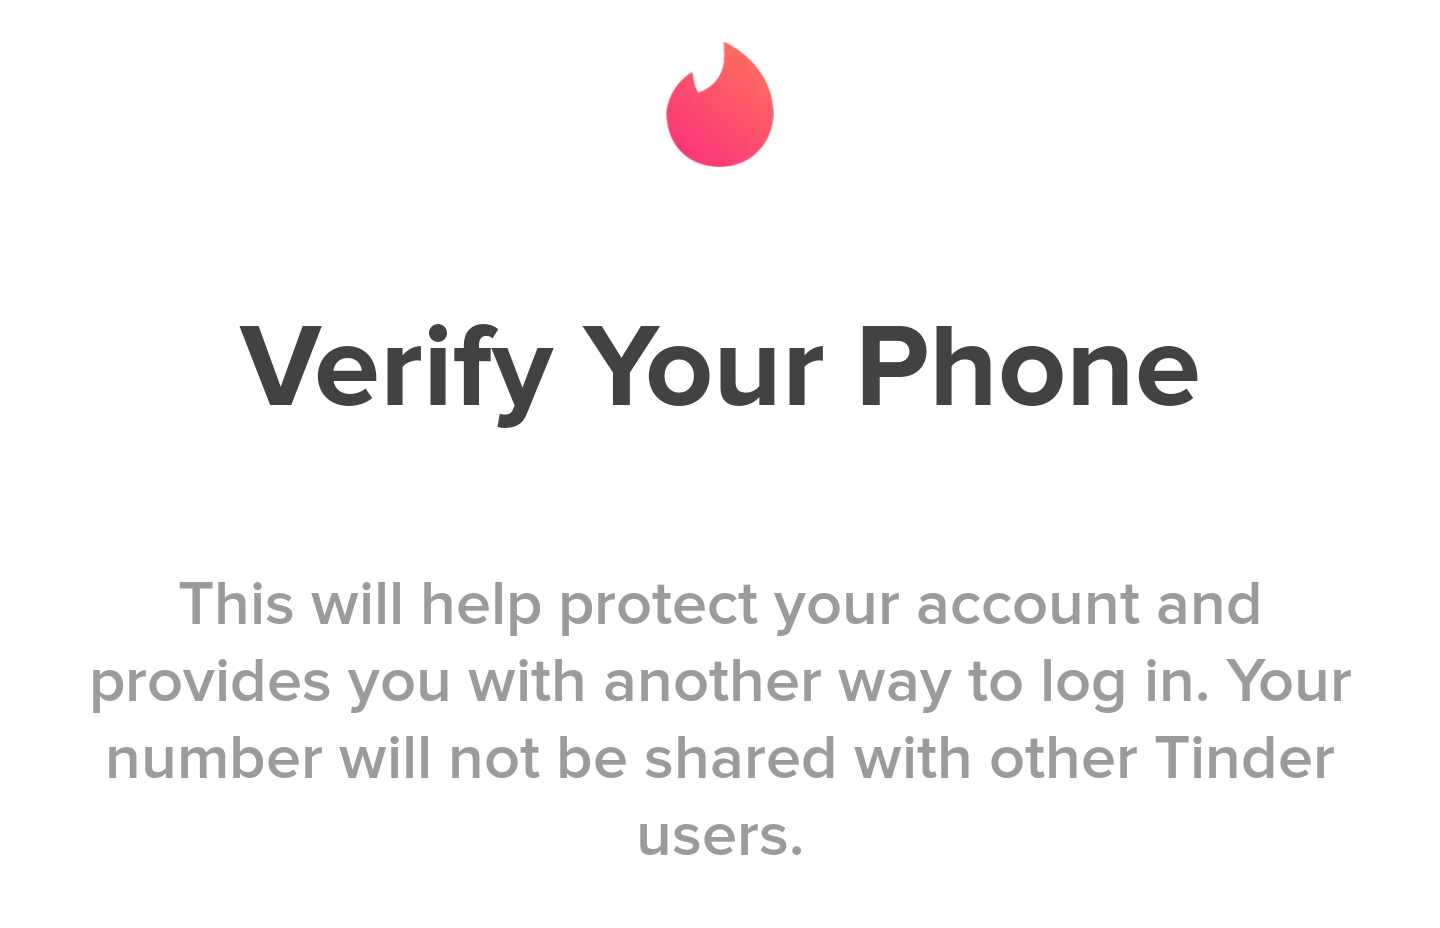 Should I use my real phone number for Tinder verification code?